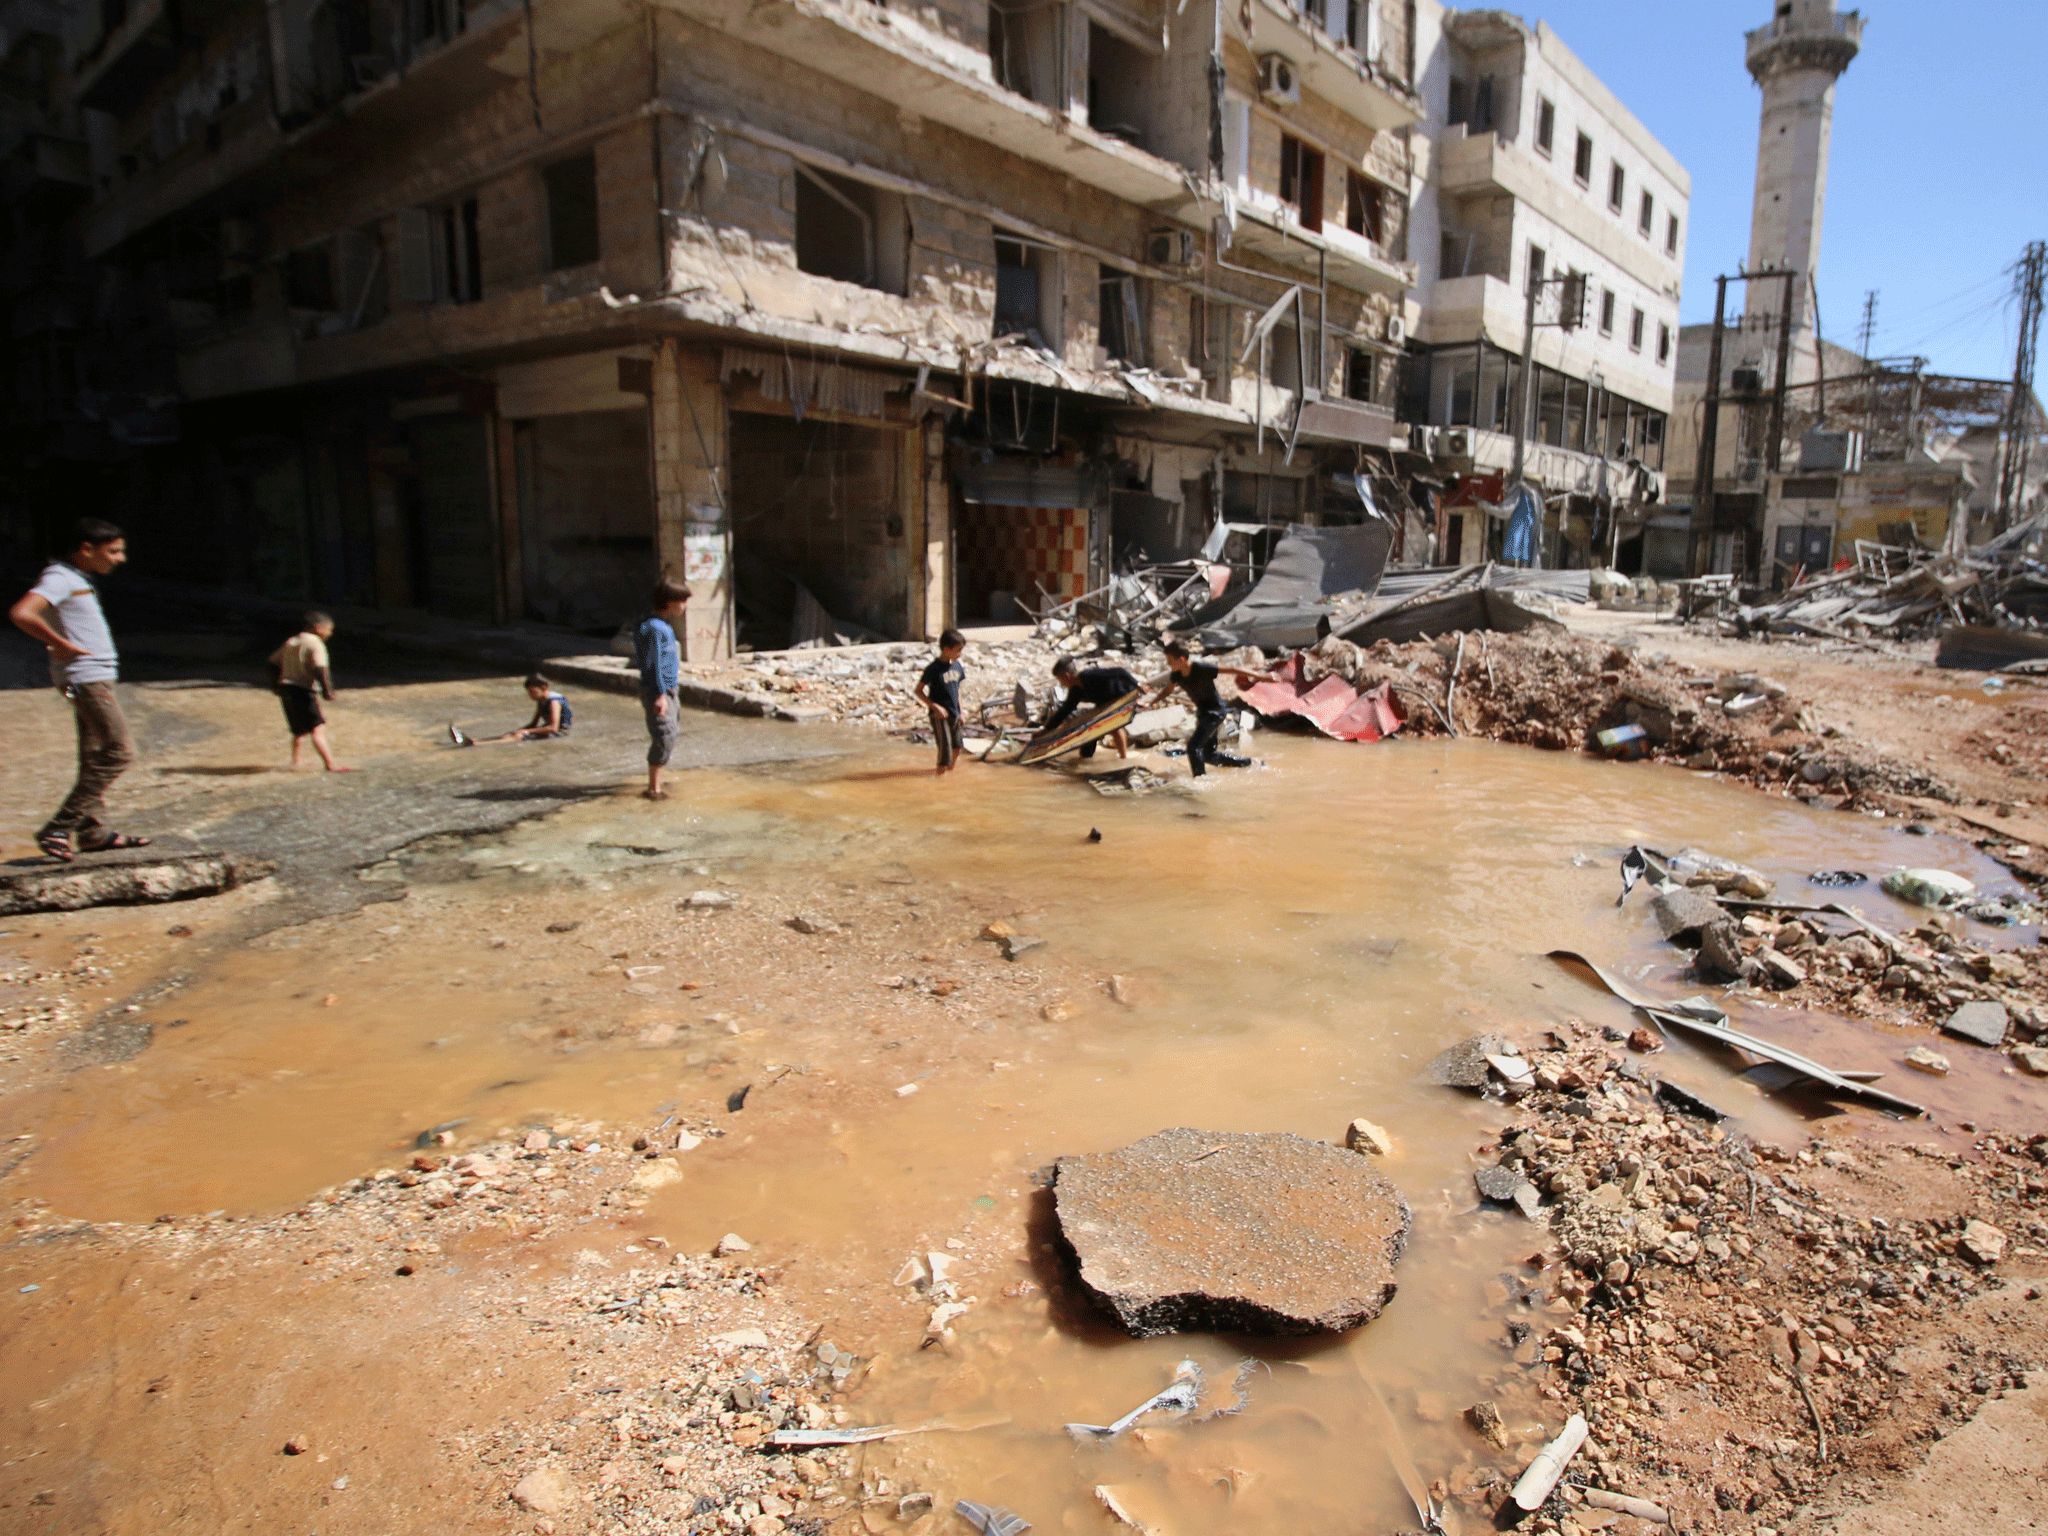 Children play with water from a burst water pipe at a site hit yesterday by an air strike in Aleppo's rebel-controlled al-Mashad neighbourhood